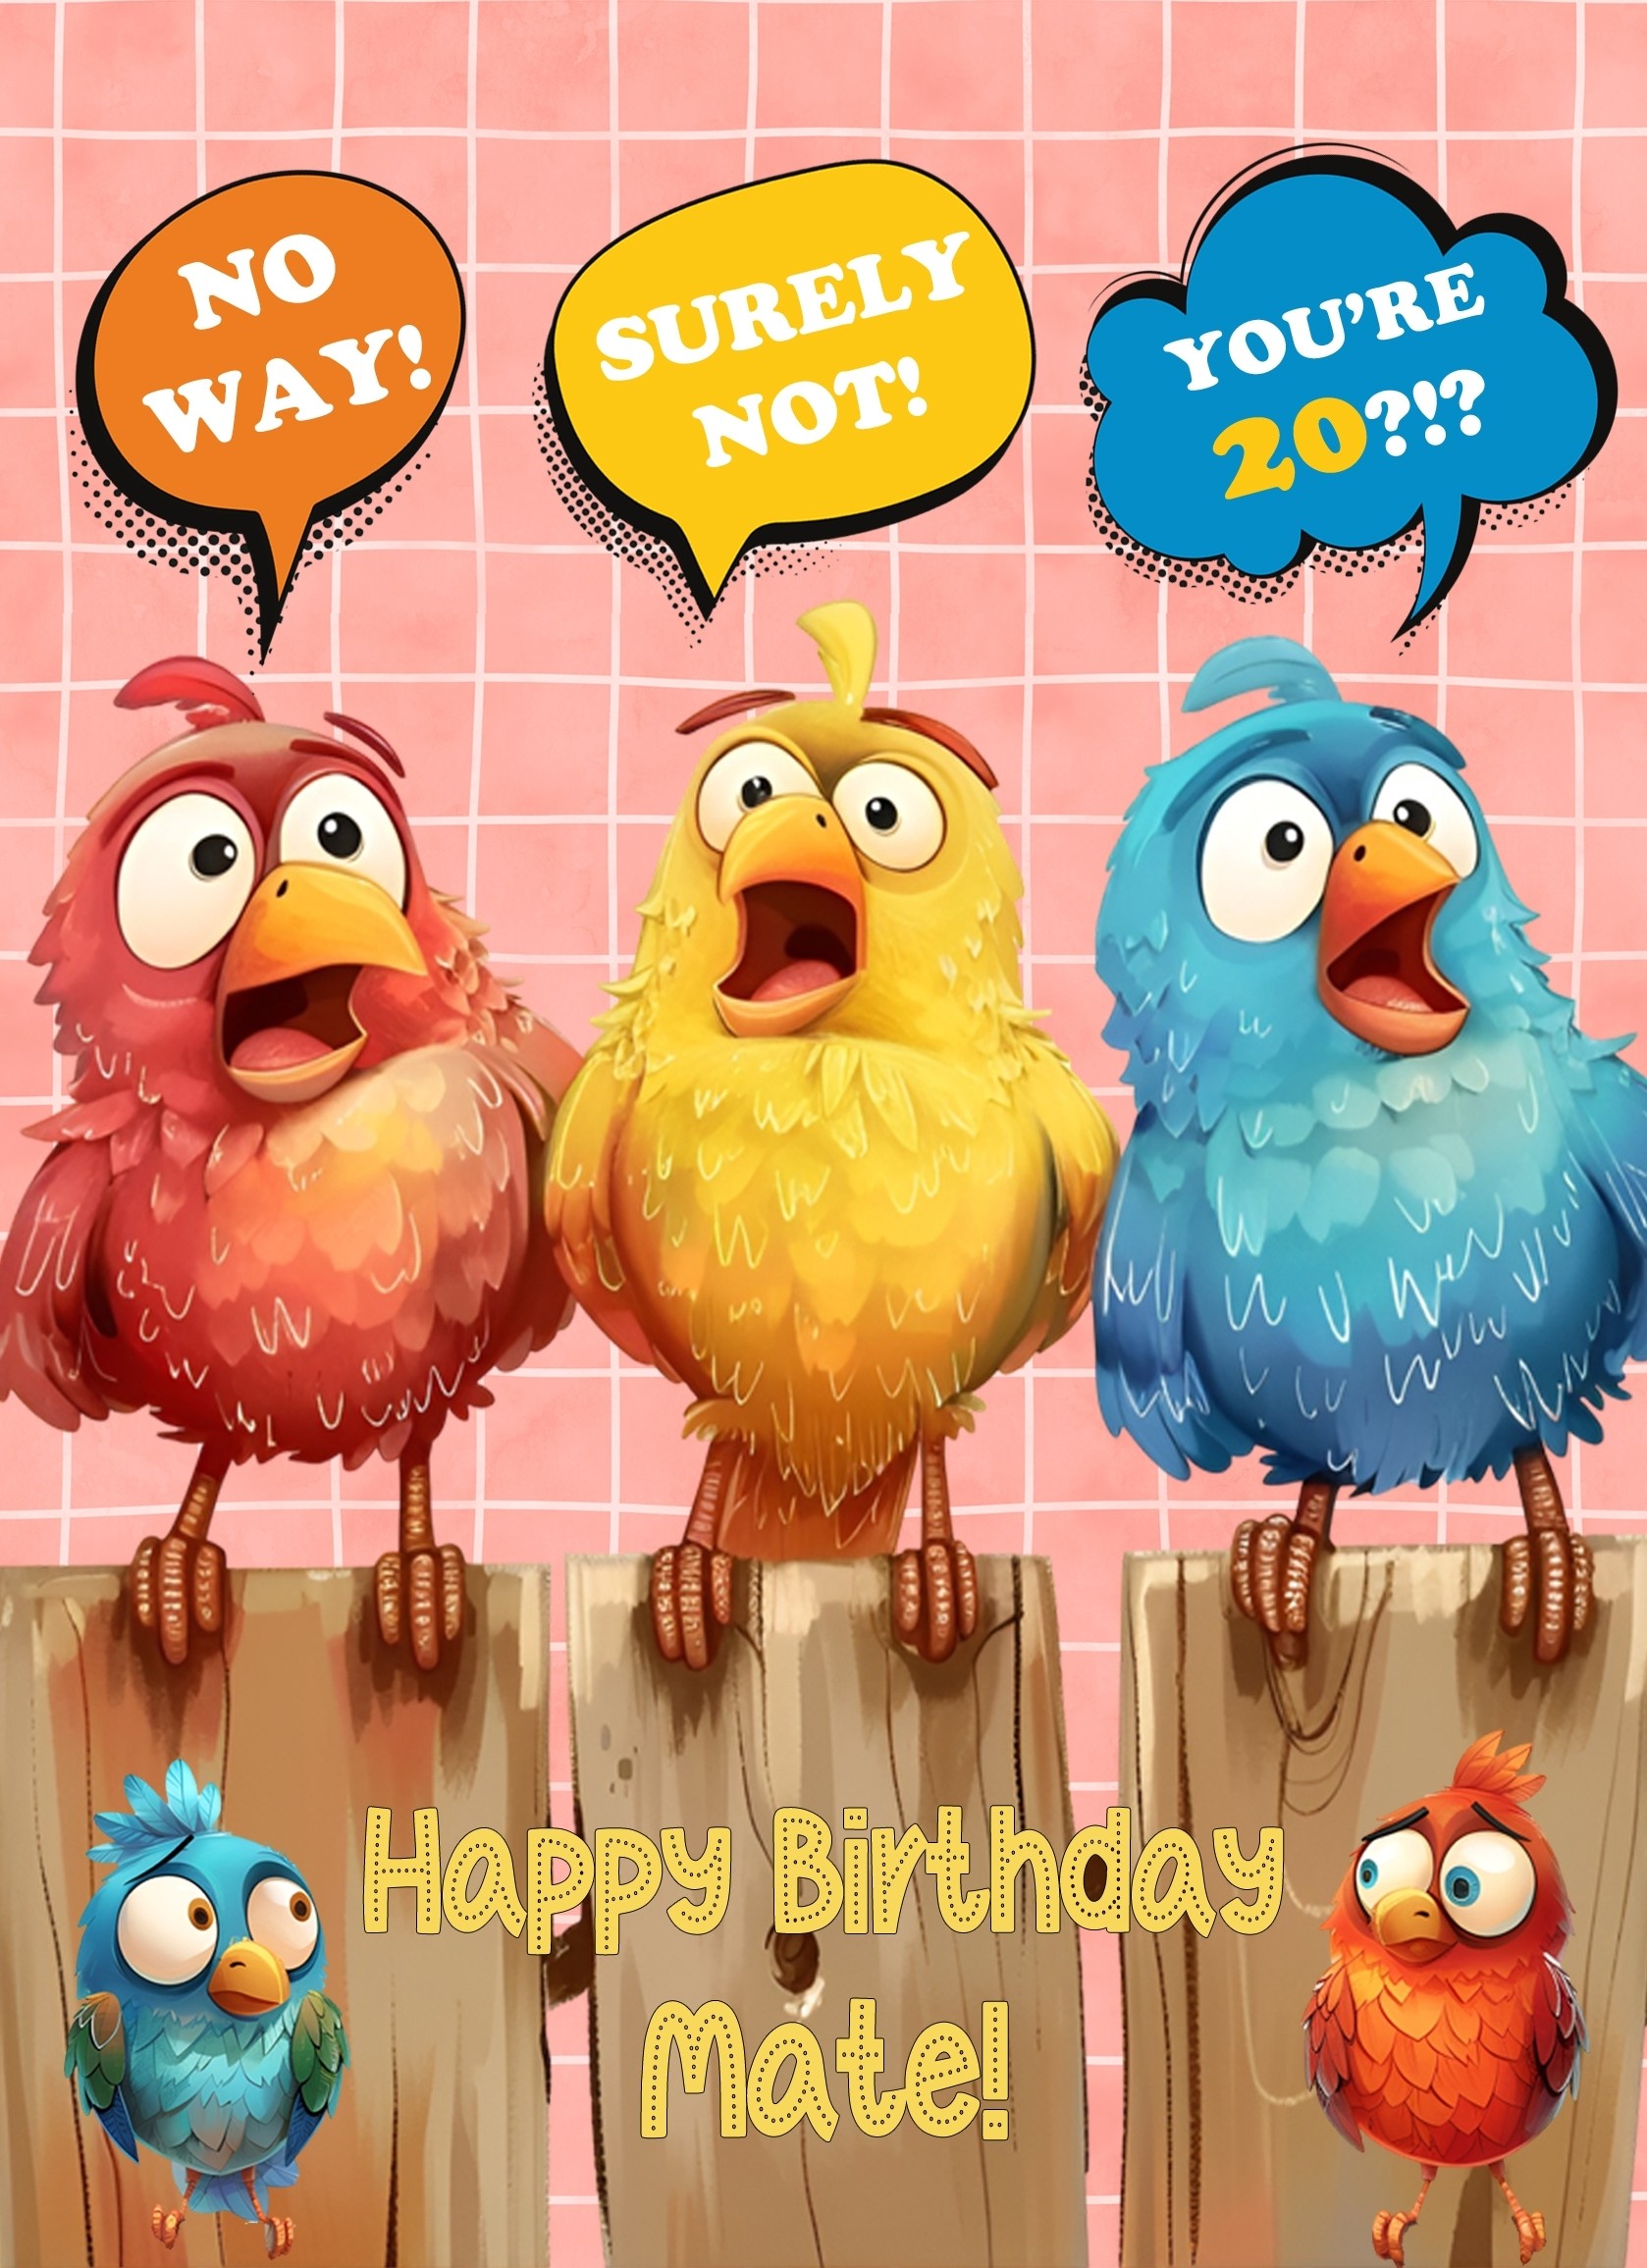 Mate 20th Birthday Card (Funny Birds Surprised)